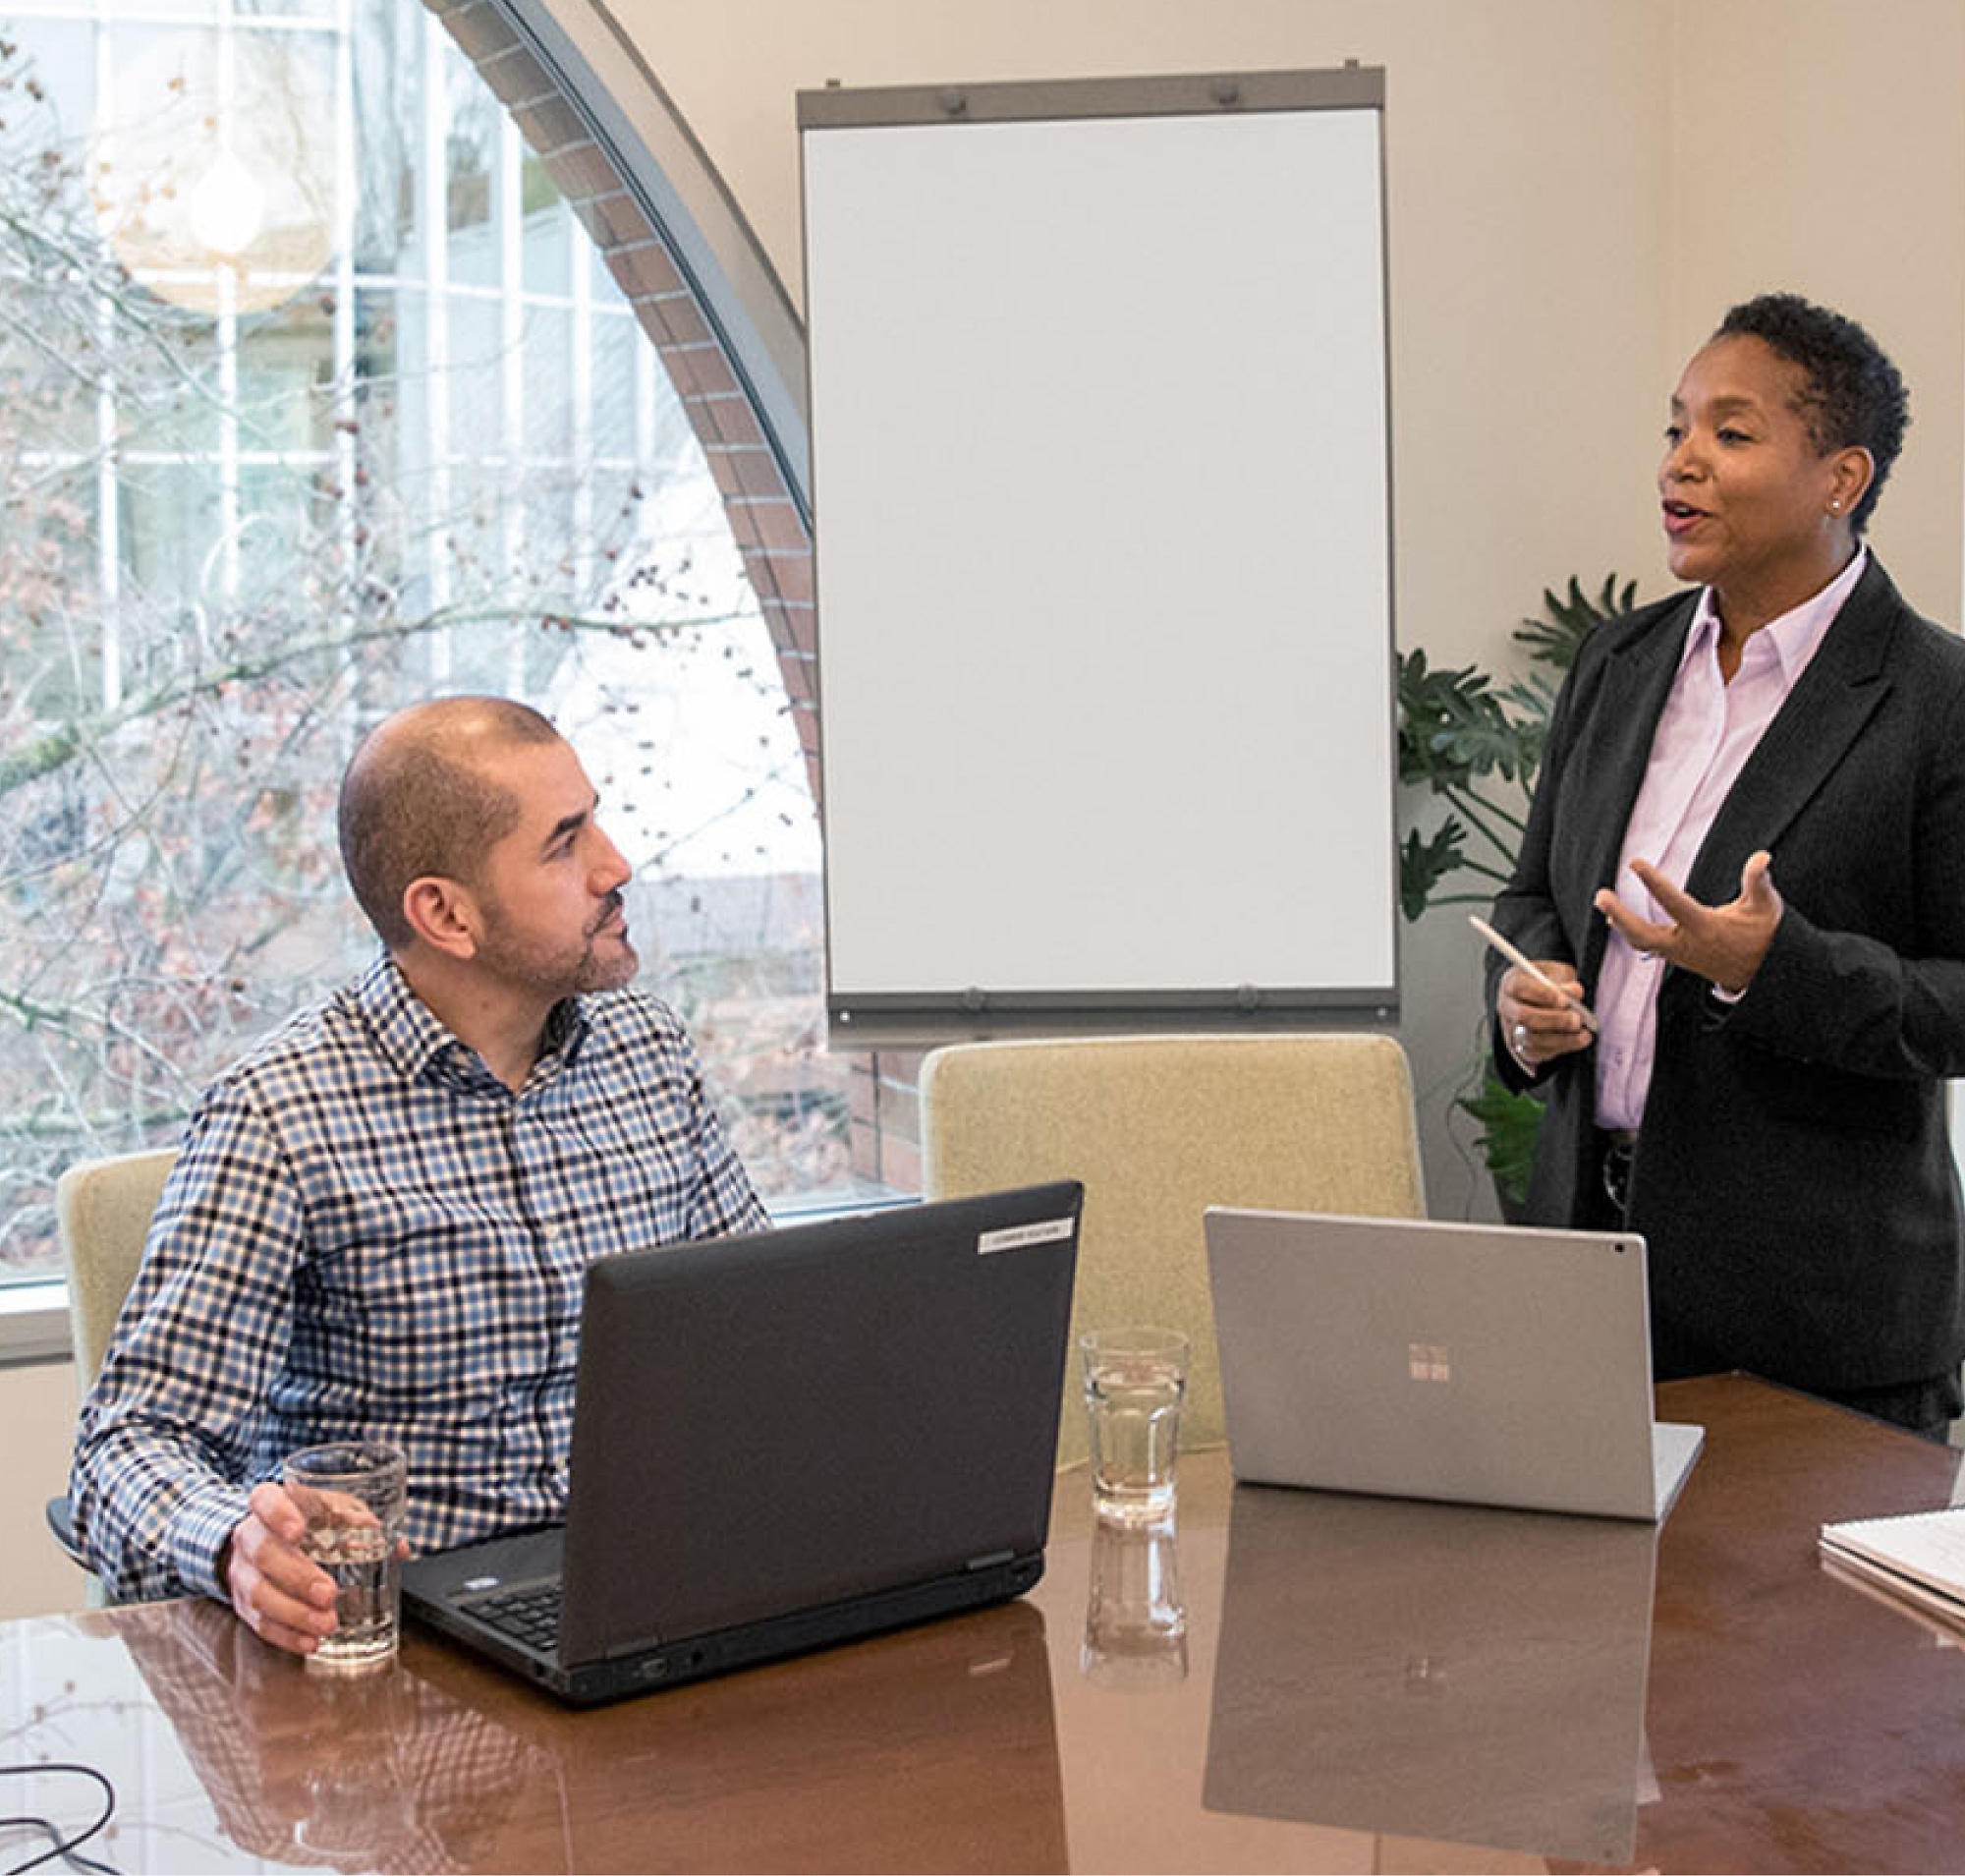 Two professionals in a meeting room one standing presenting and one seated at a table with laptops in front of a whiteboard.